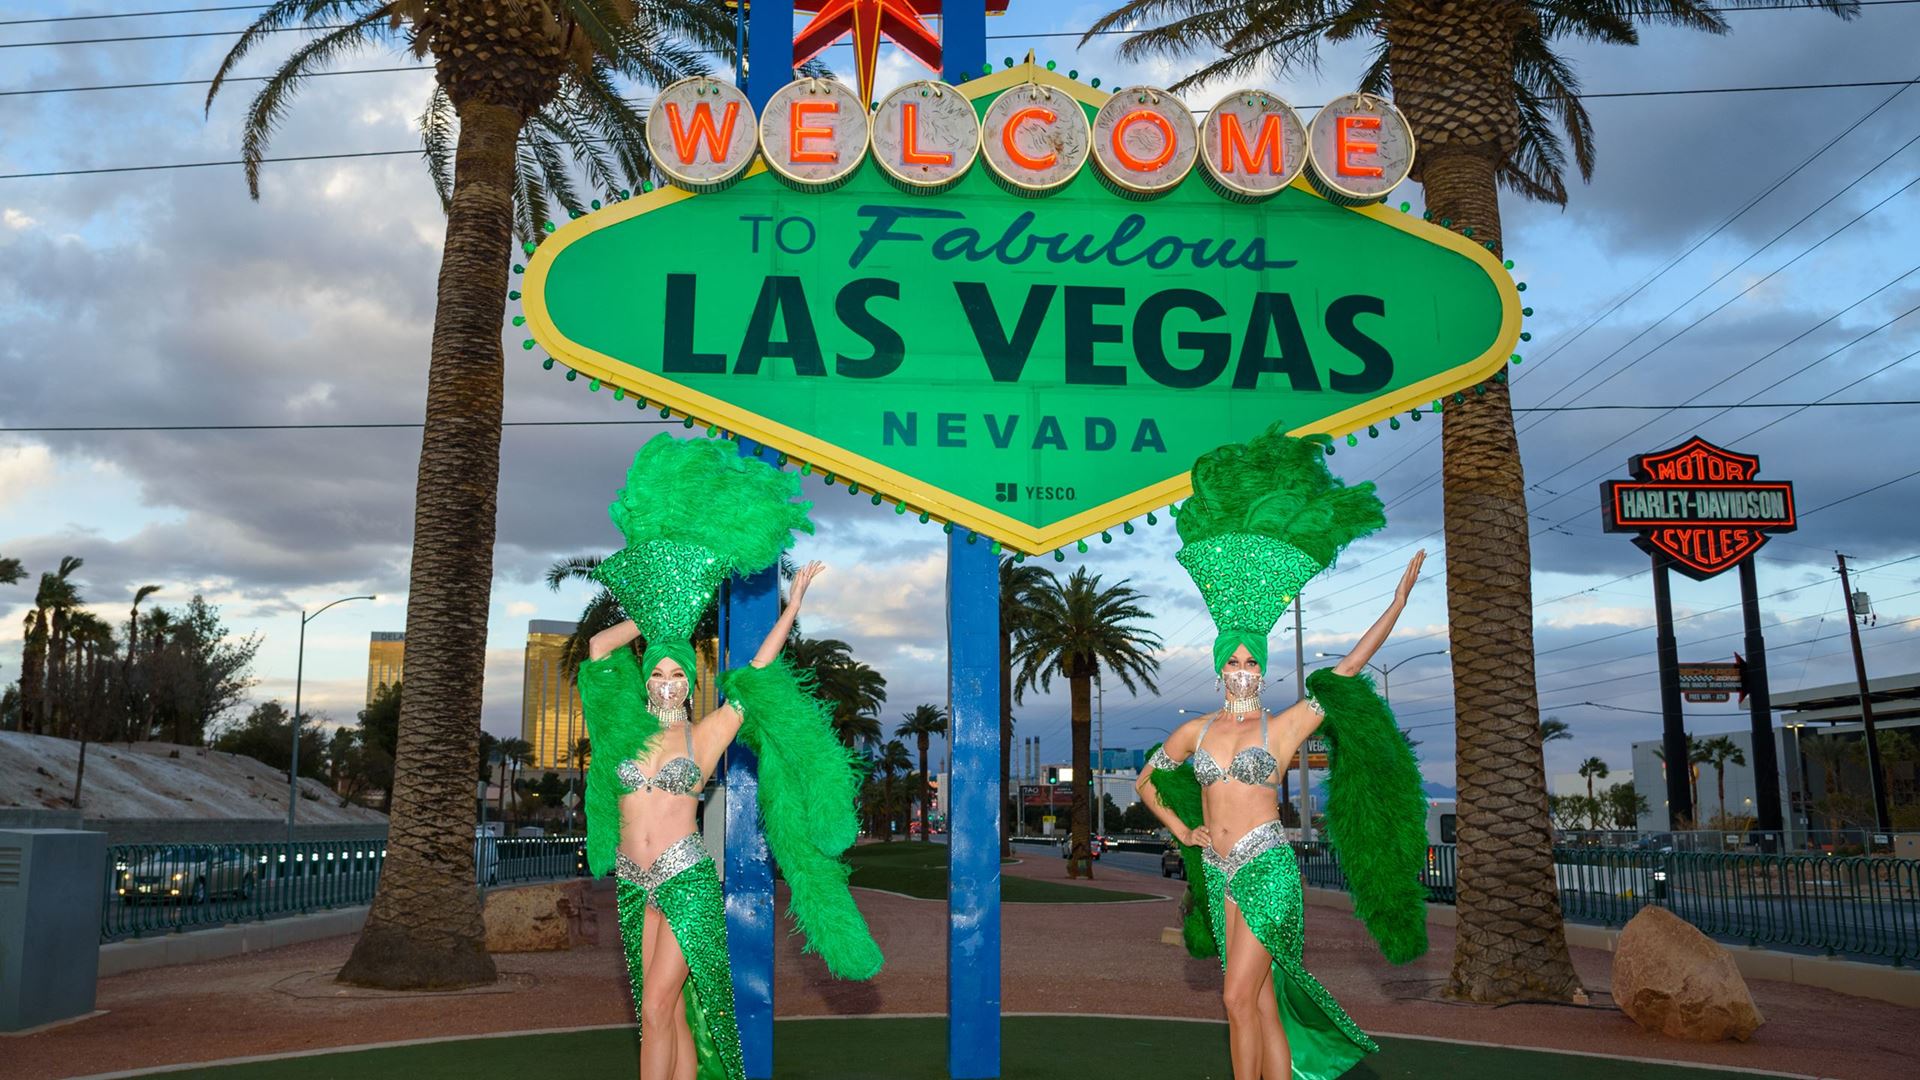 to Fabulous Las Vegas" Sign Goes Green for St. Patrick's Day